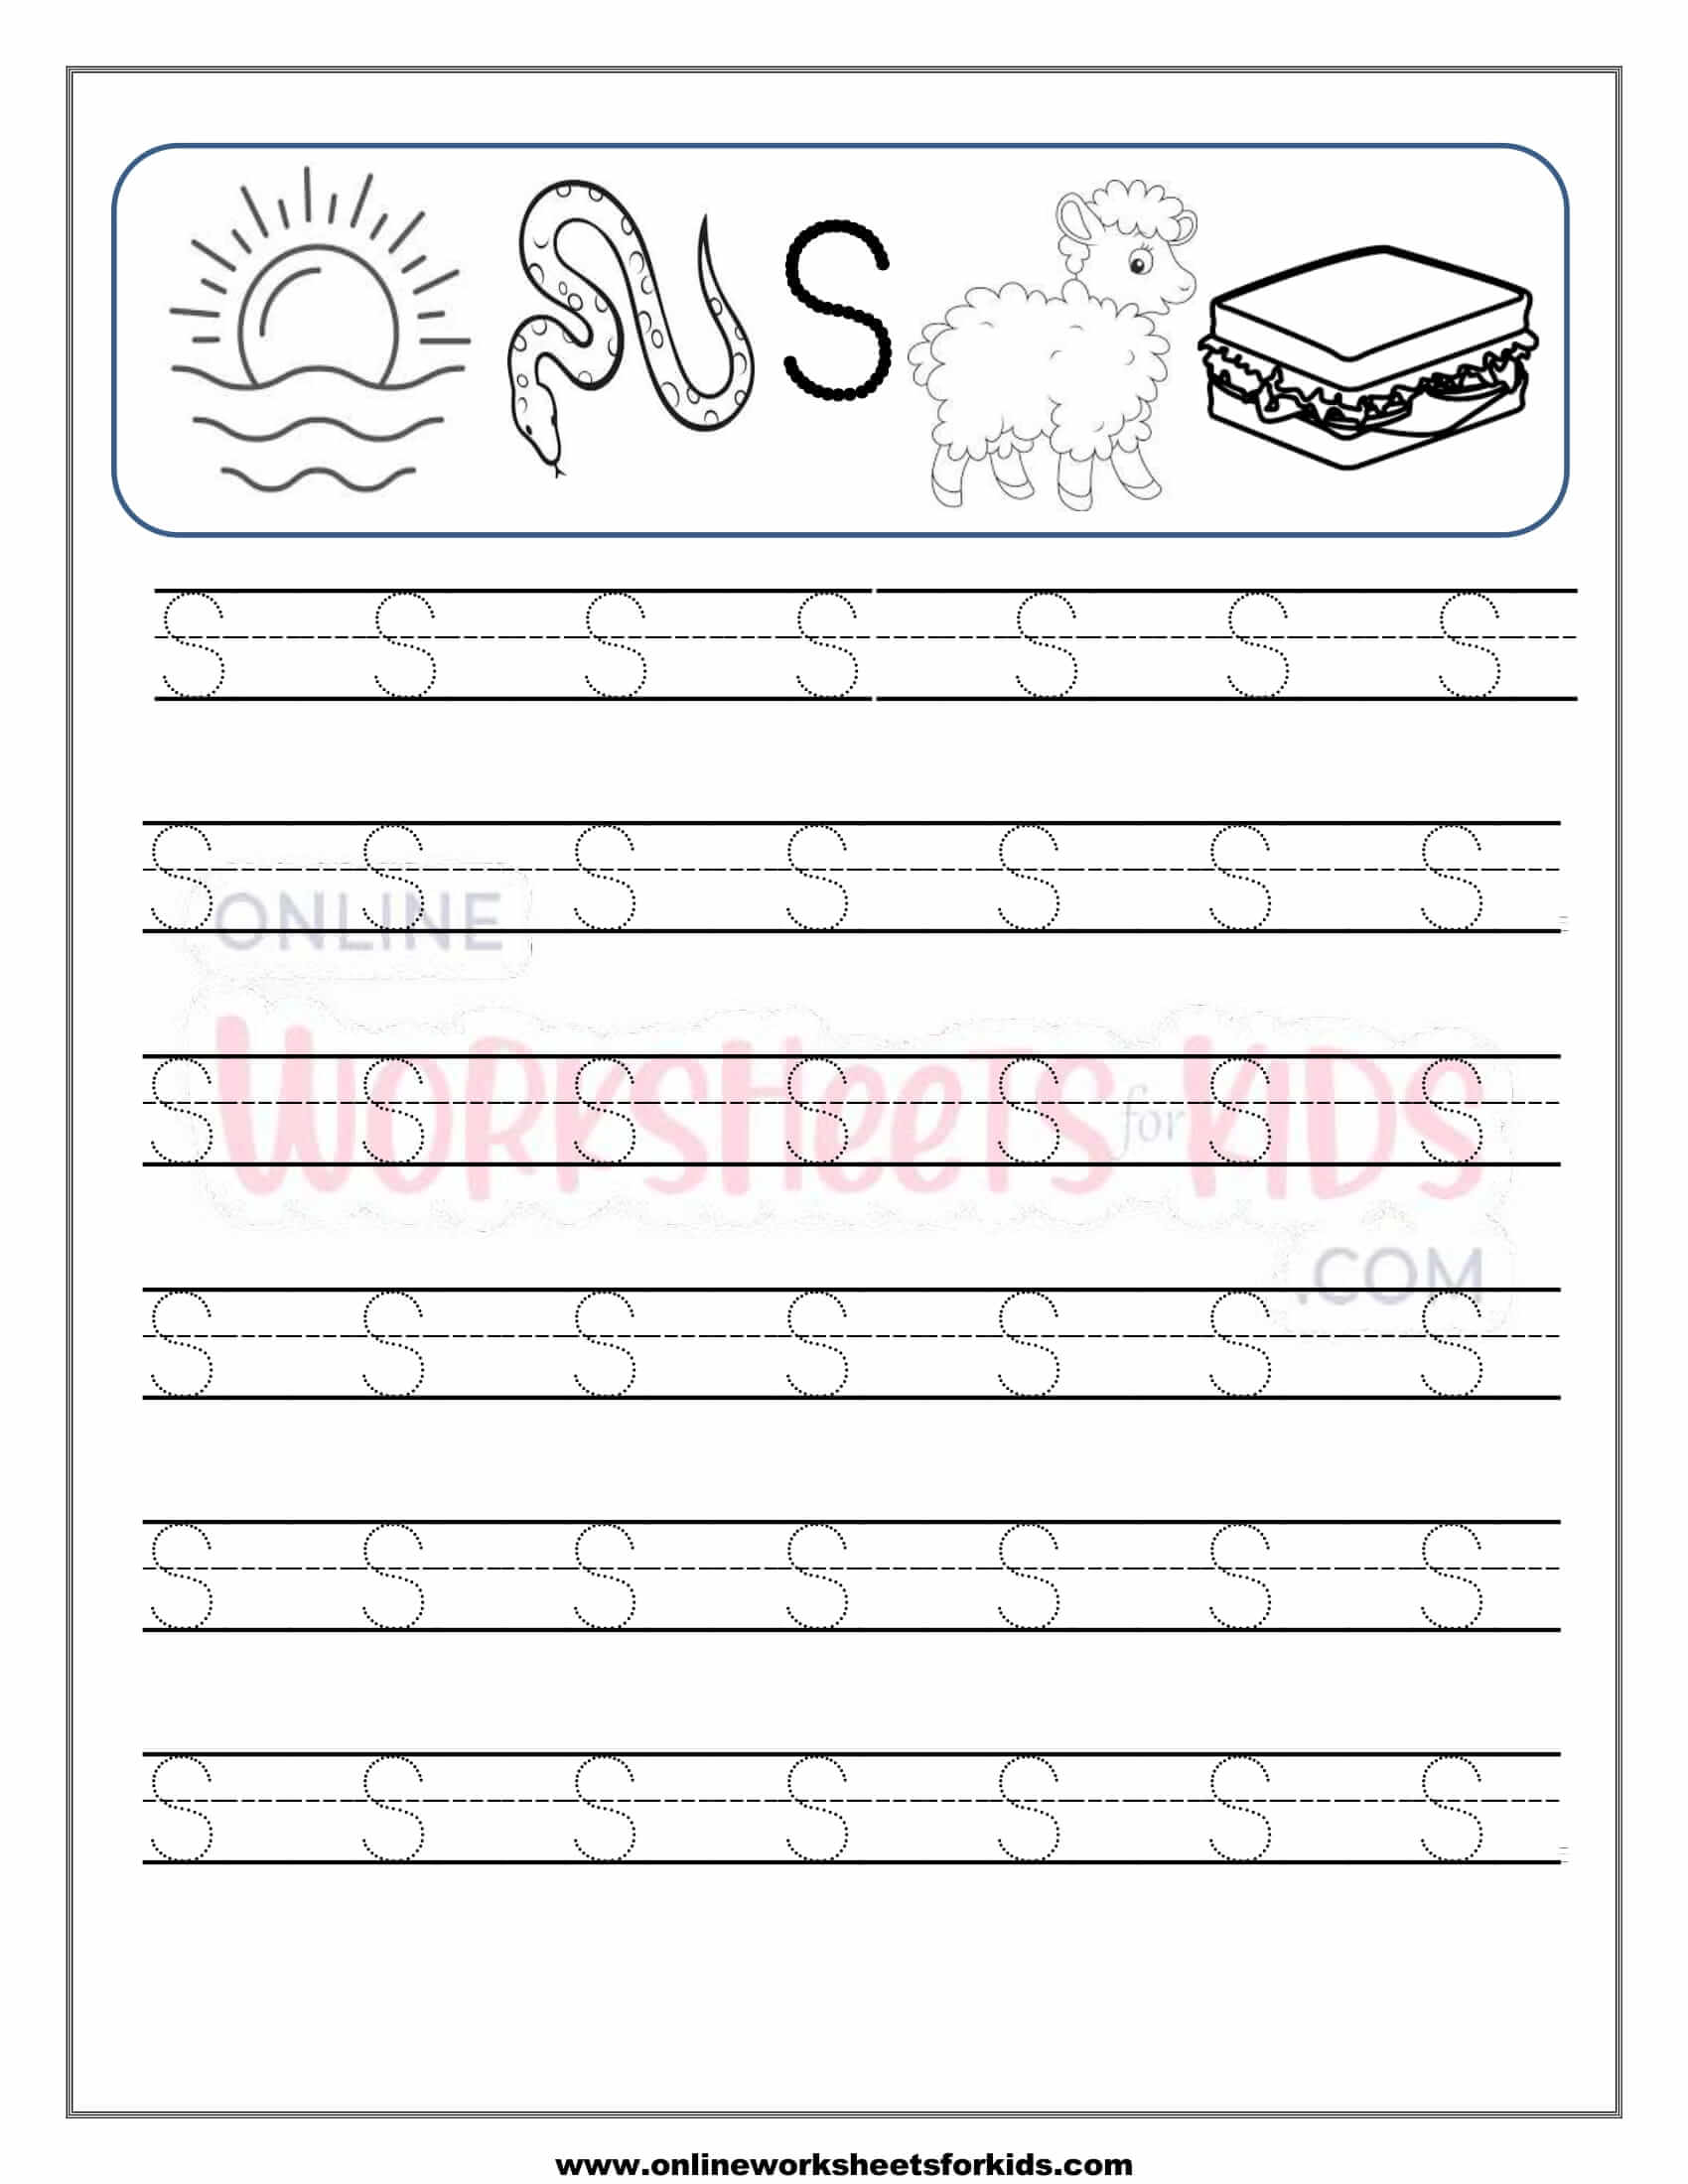 letter-tracing-worksheet-capital-letters-19